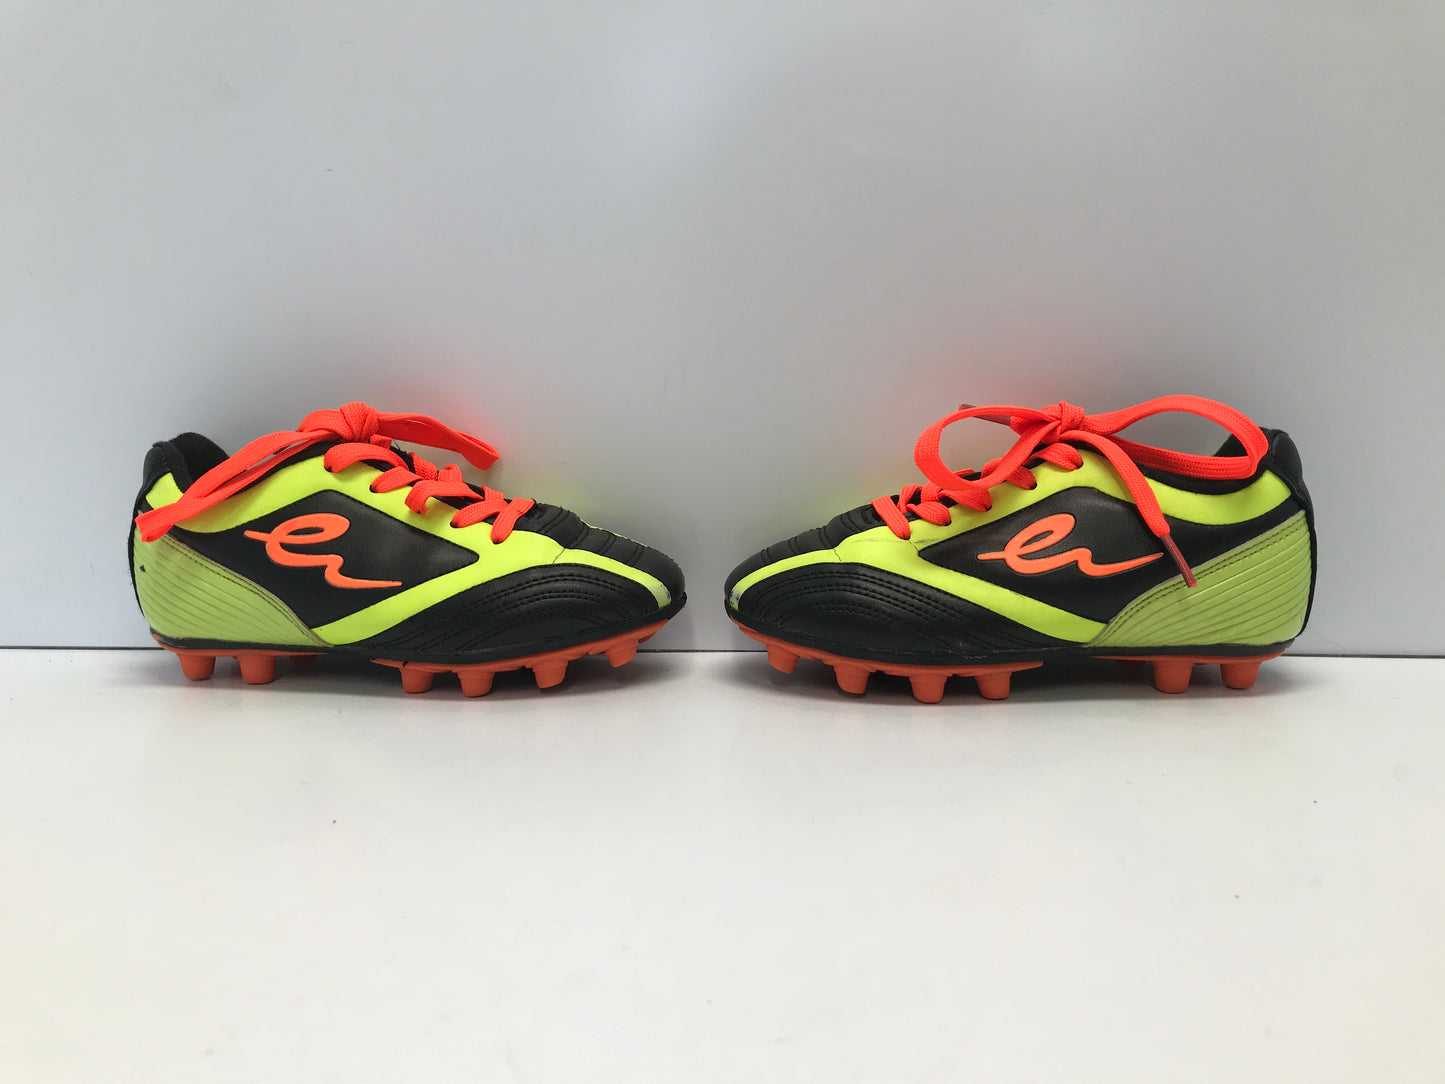 Soccer Shoes Cleats Child Size 13 Black Lime Pumpkin Like New